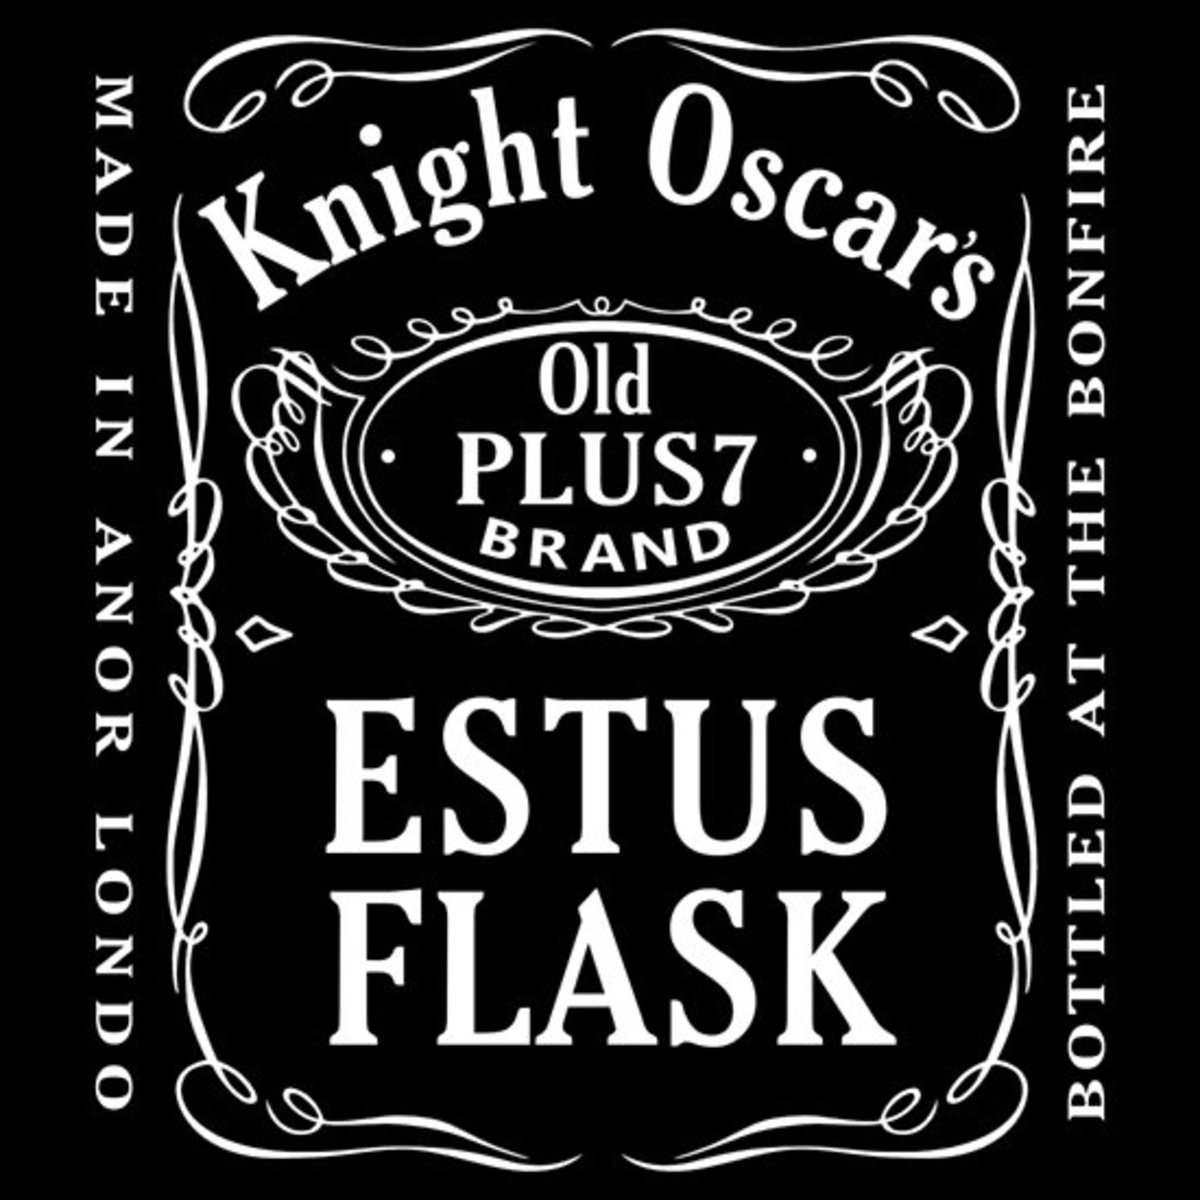 Estus Flask is such a better mechanic than Item Burden, that is why no one makes ironic shirts about it.